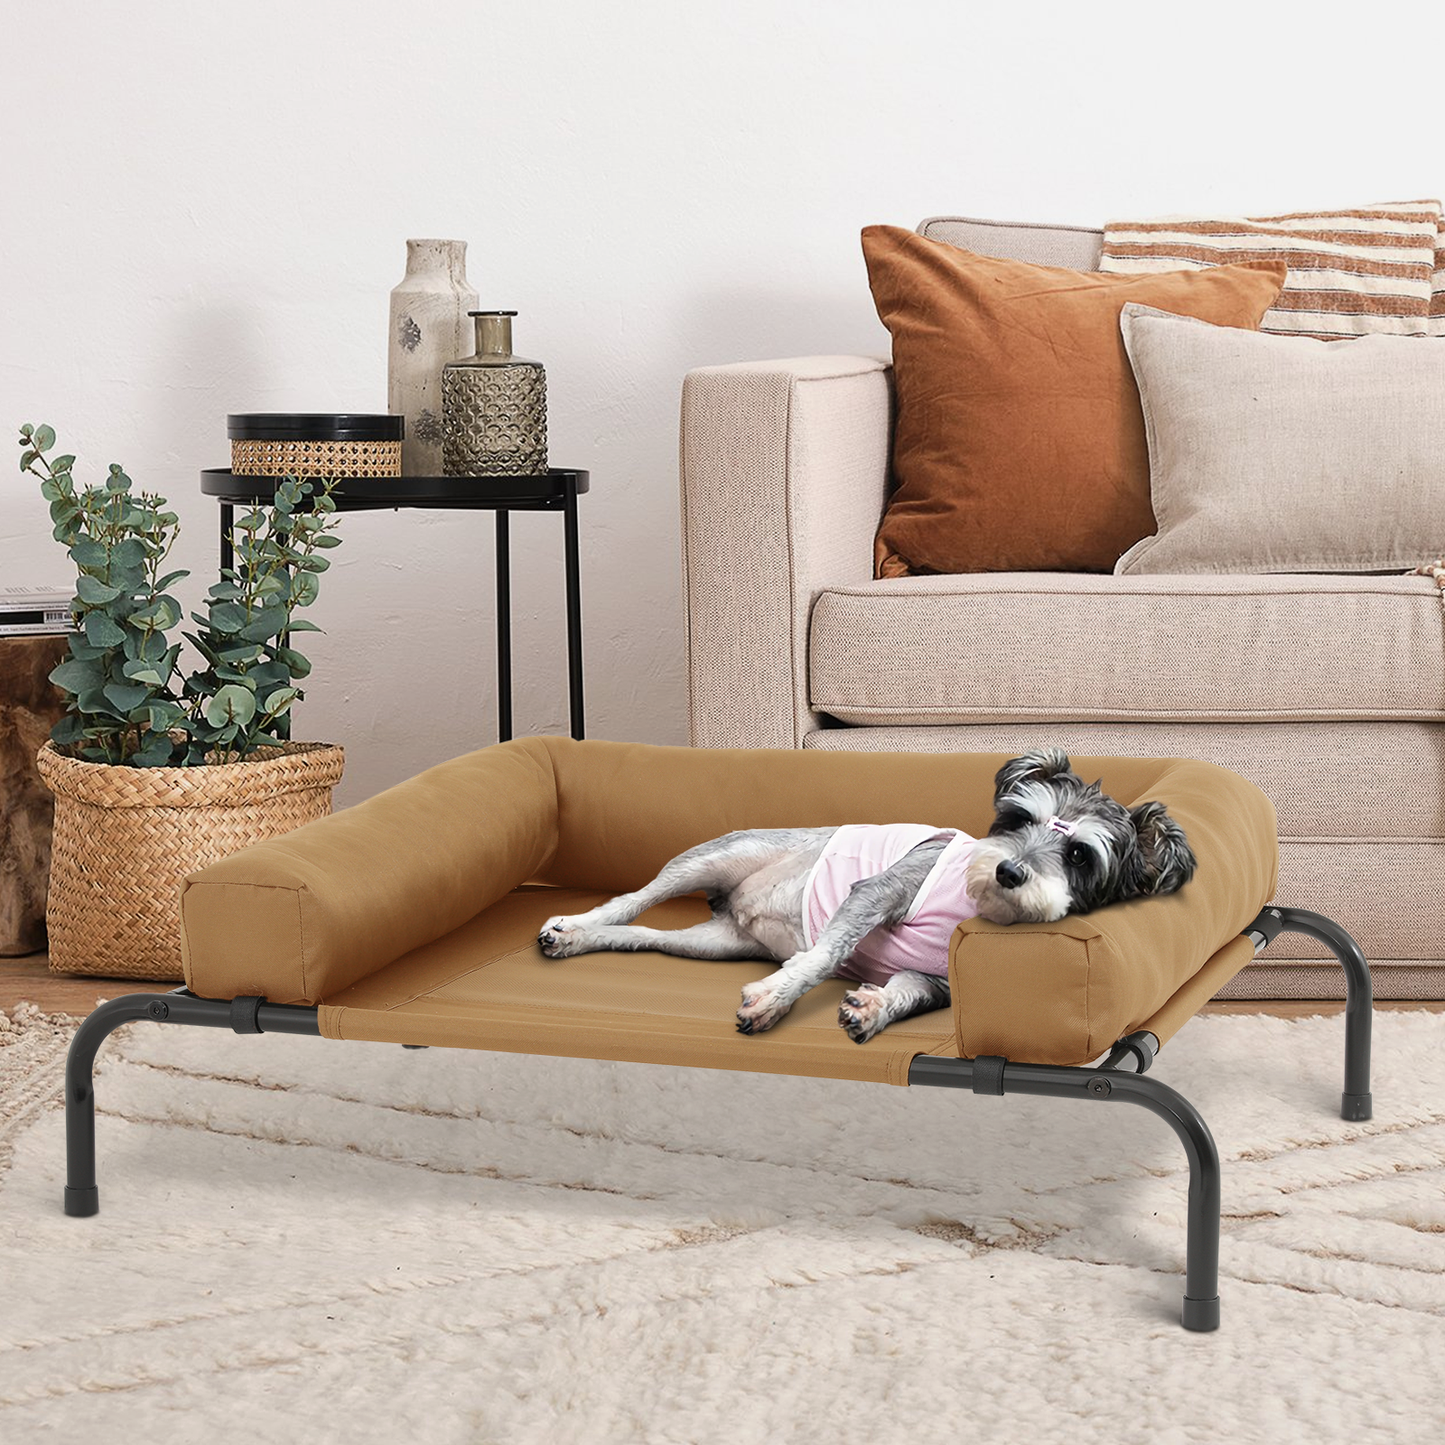 Elevated Dog Bed - w/ Removable Bolster - 35.5'' Length